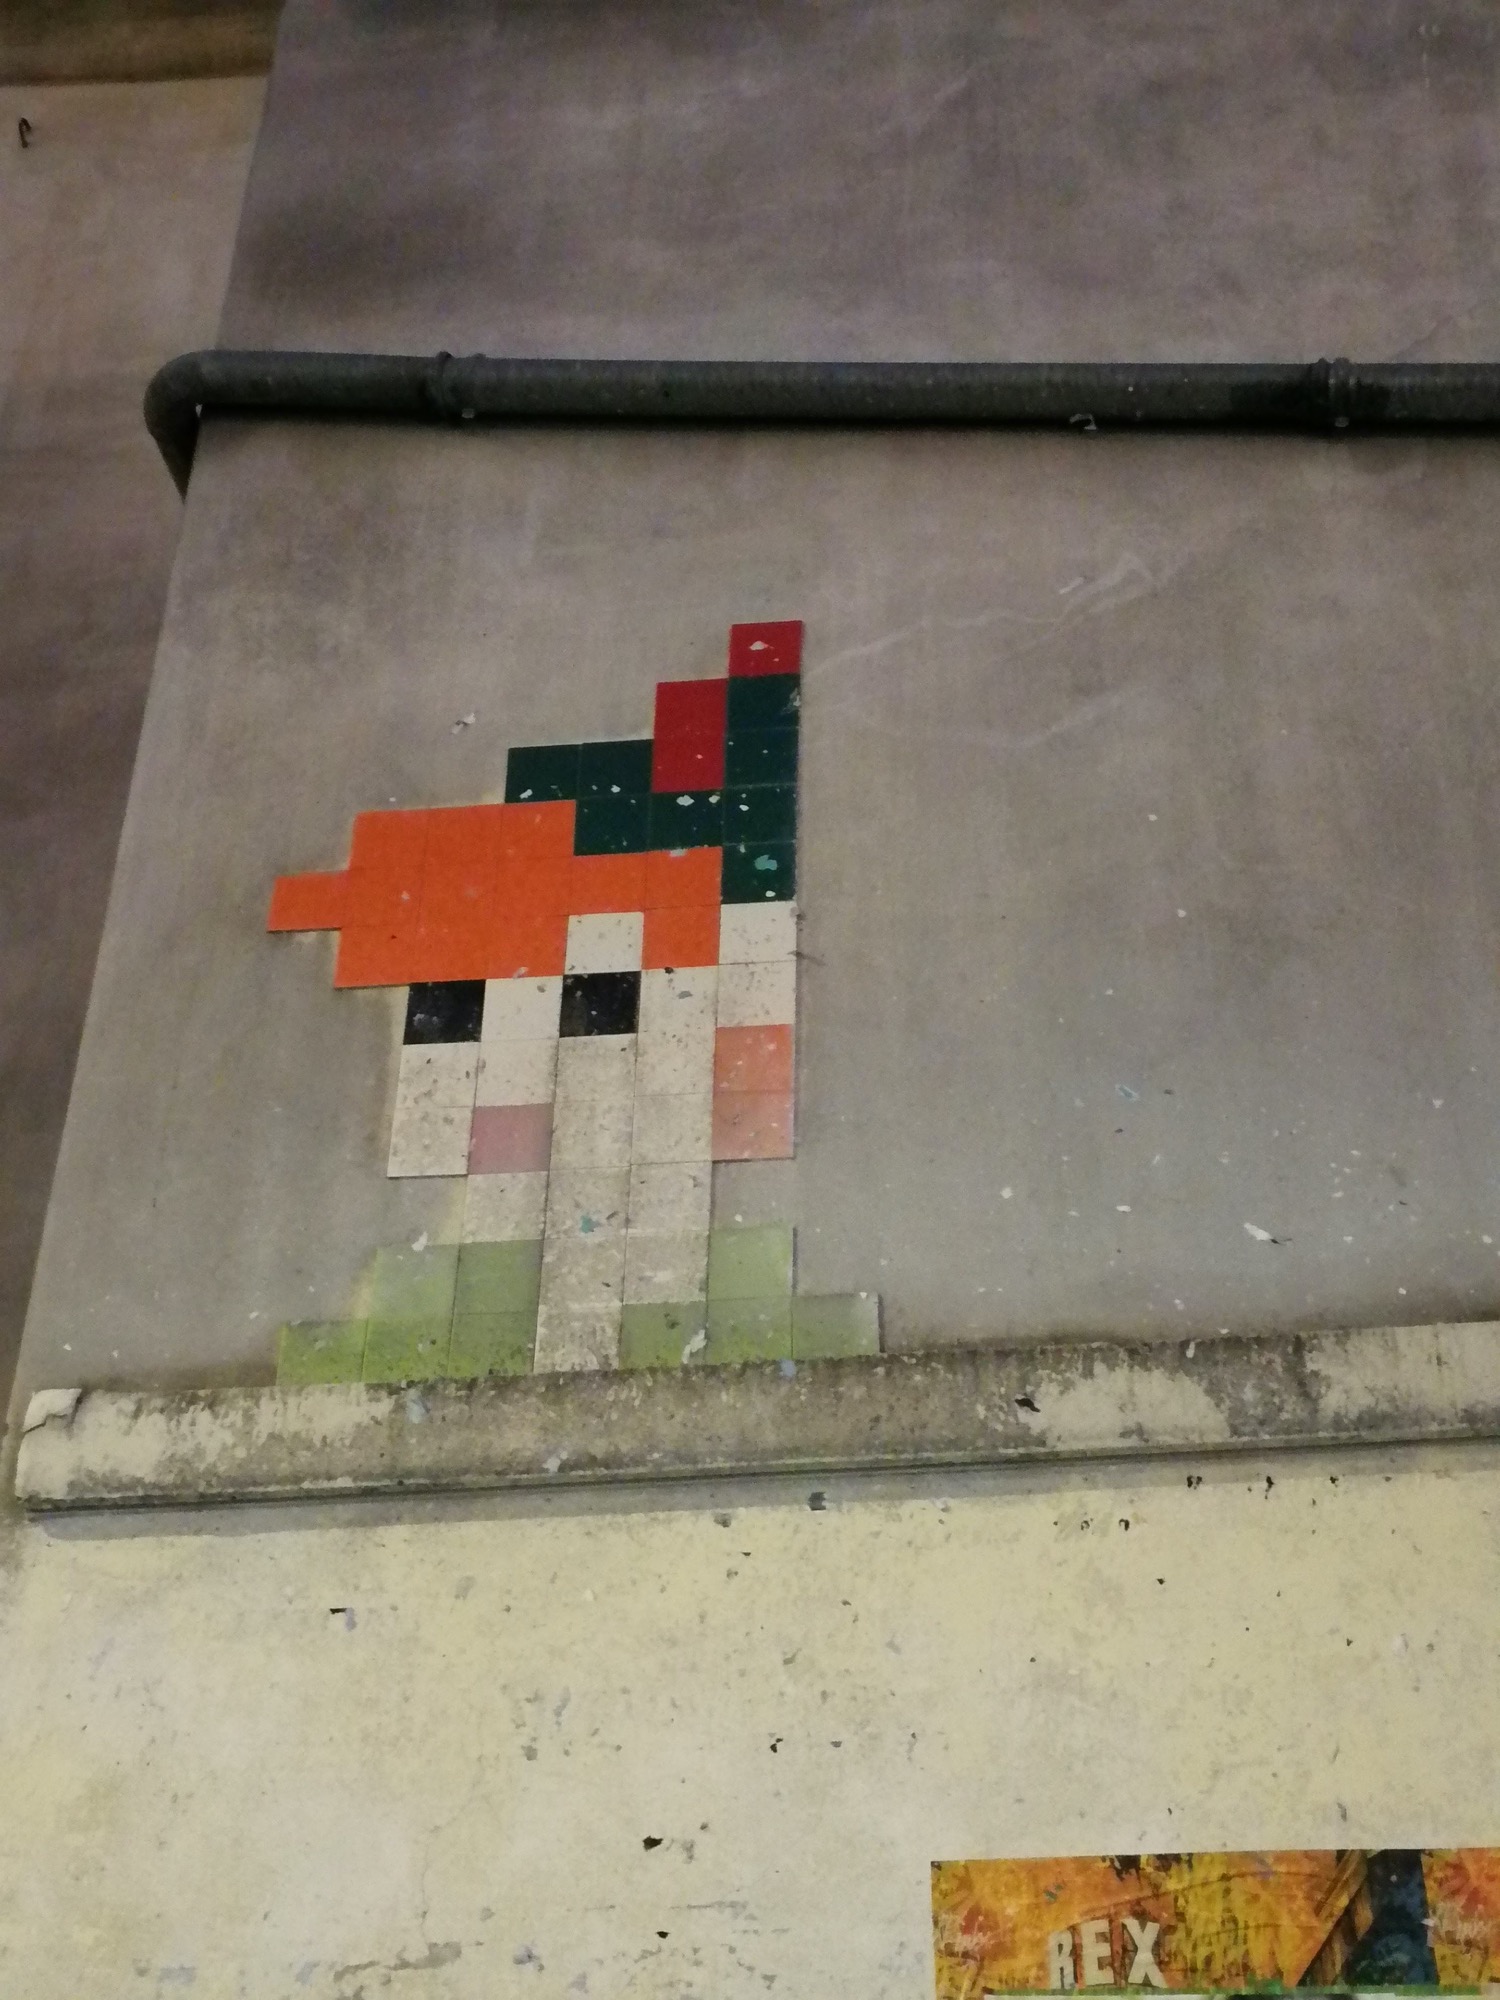 Mosaic 663  by the artist Invader captured by Rabot in Paris France